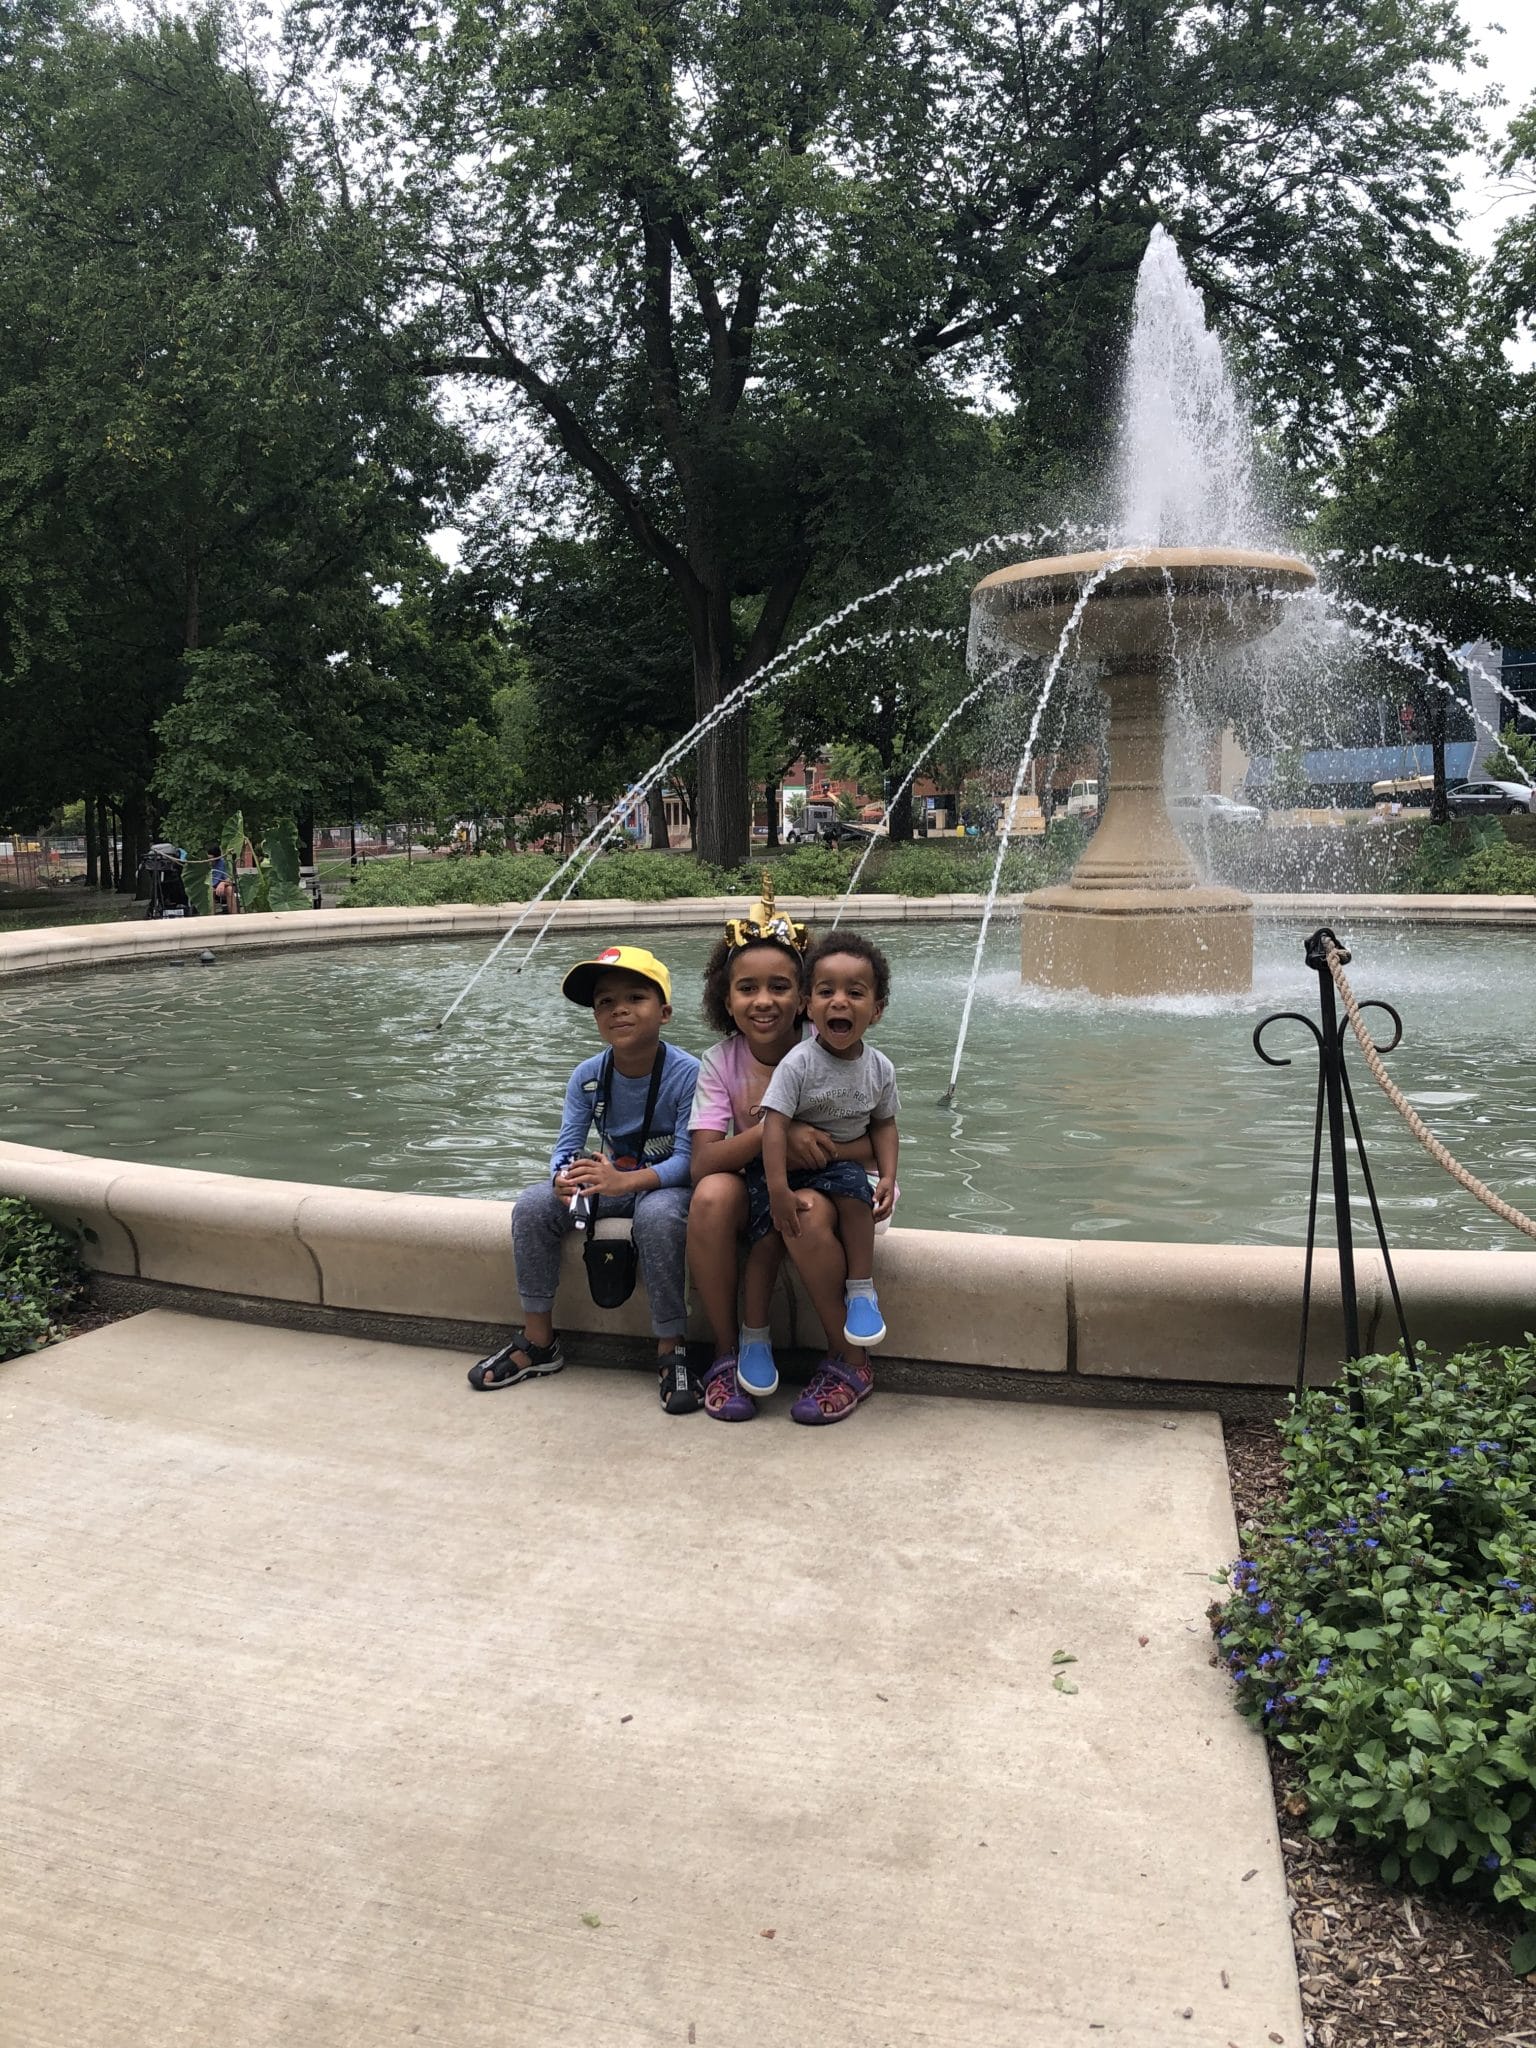 Children sitting by the fountain in Allegheny Commons Park